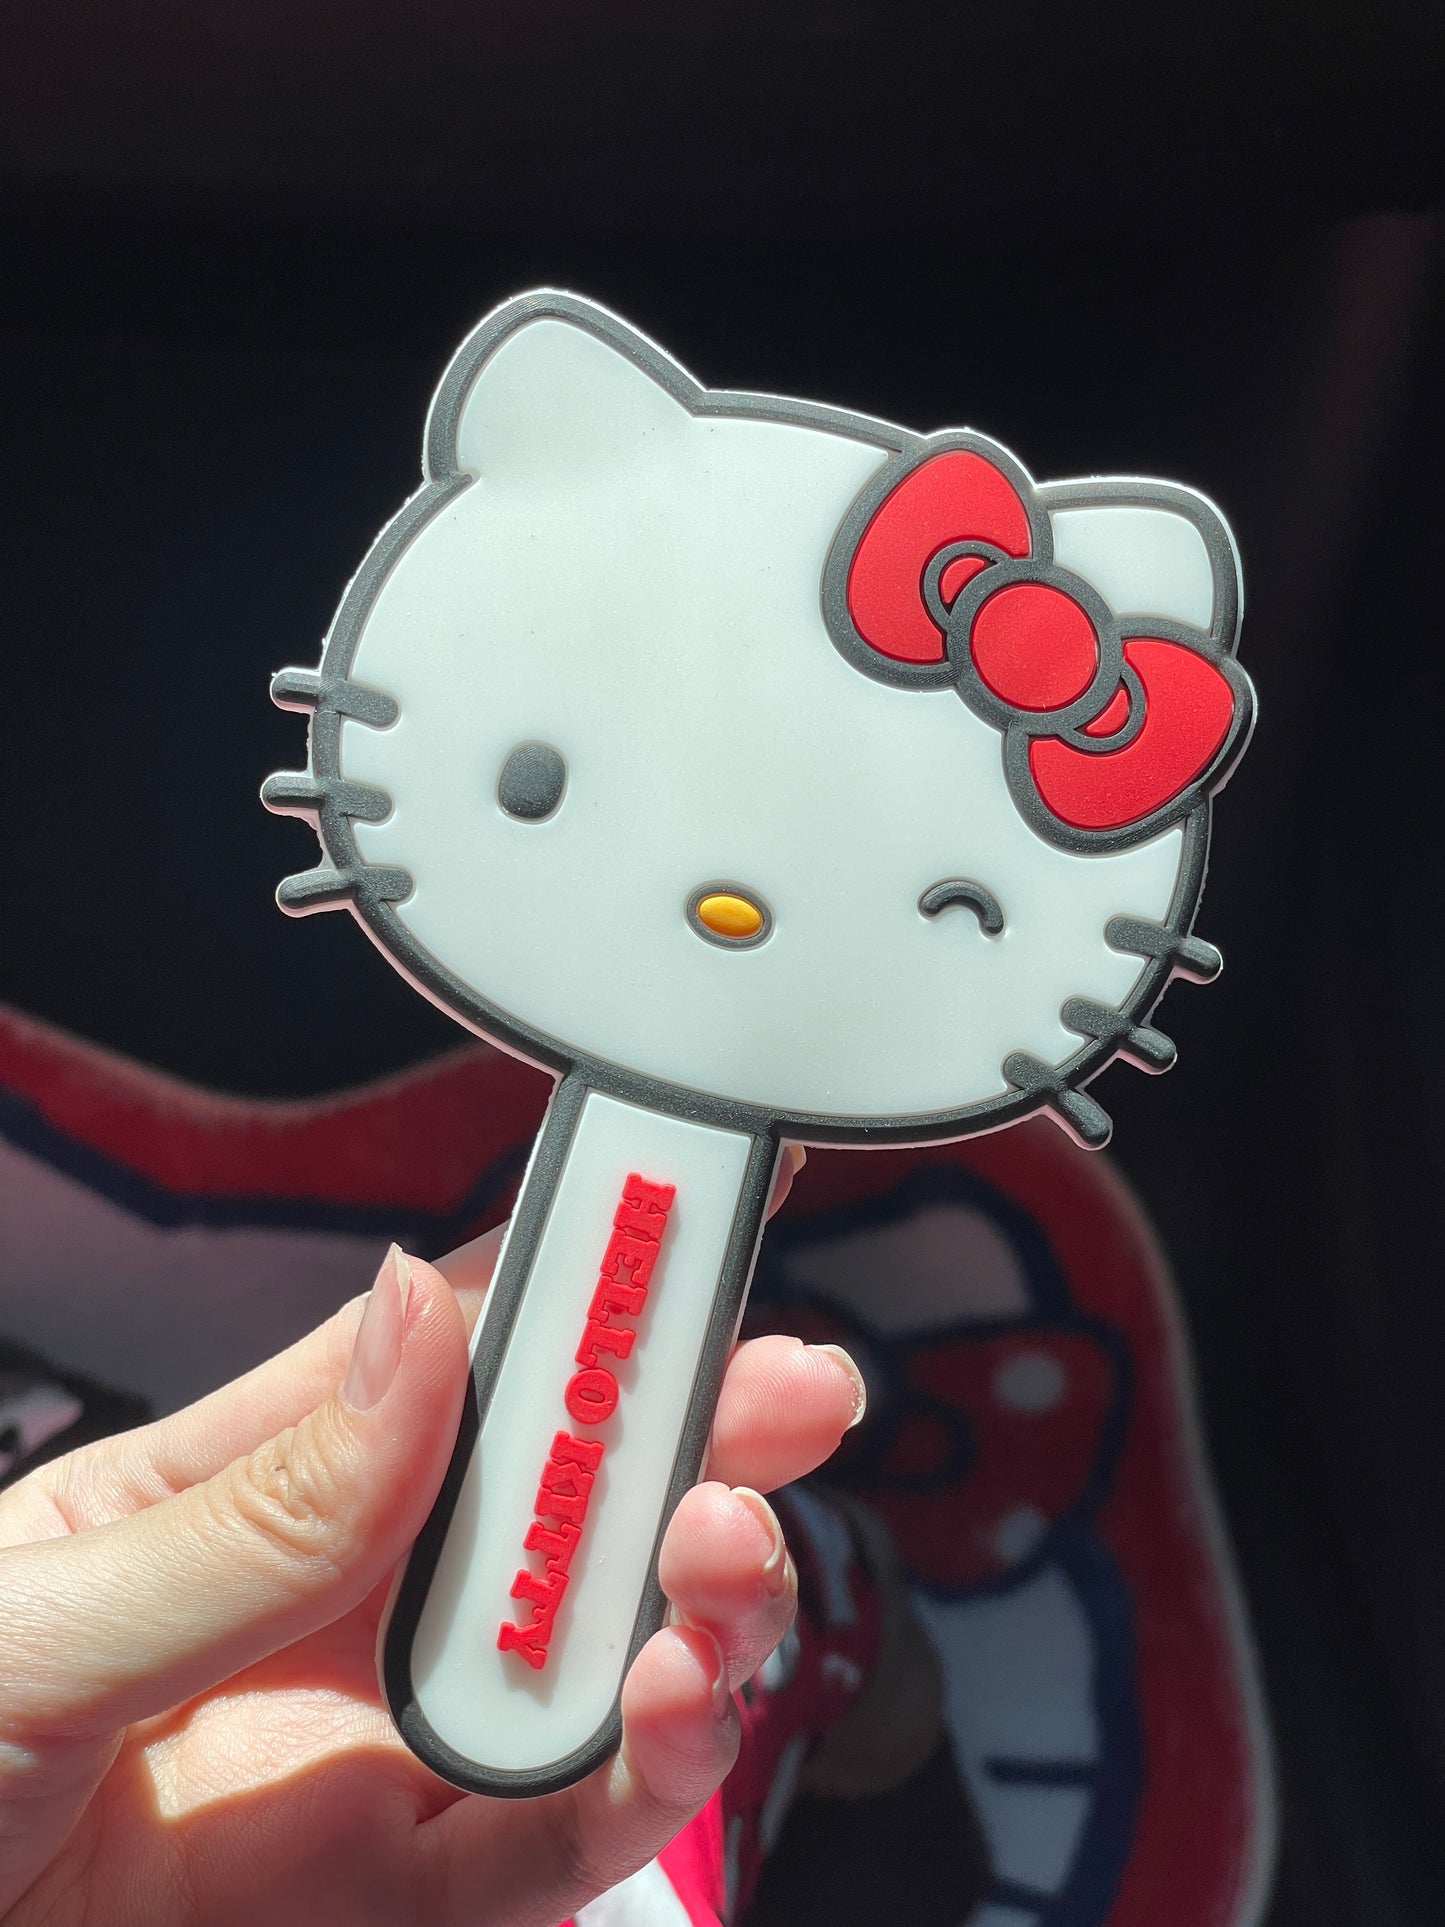 Hellokitty Travel Handheld Silicone Mirror Portable Personal Cosmetic Hand Mirror